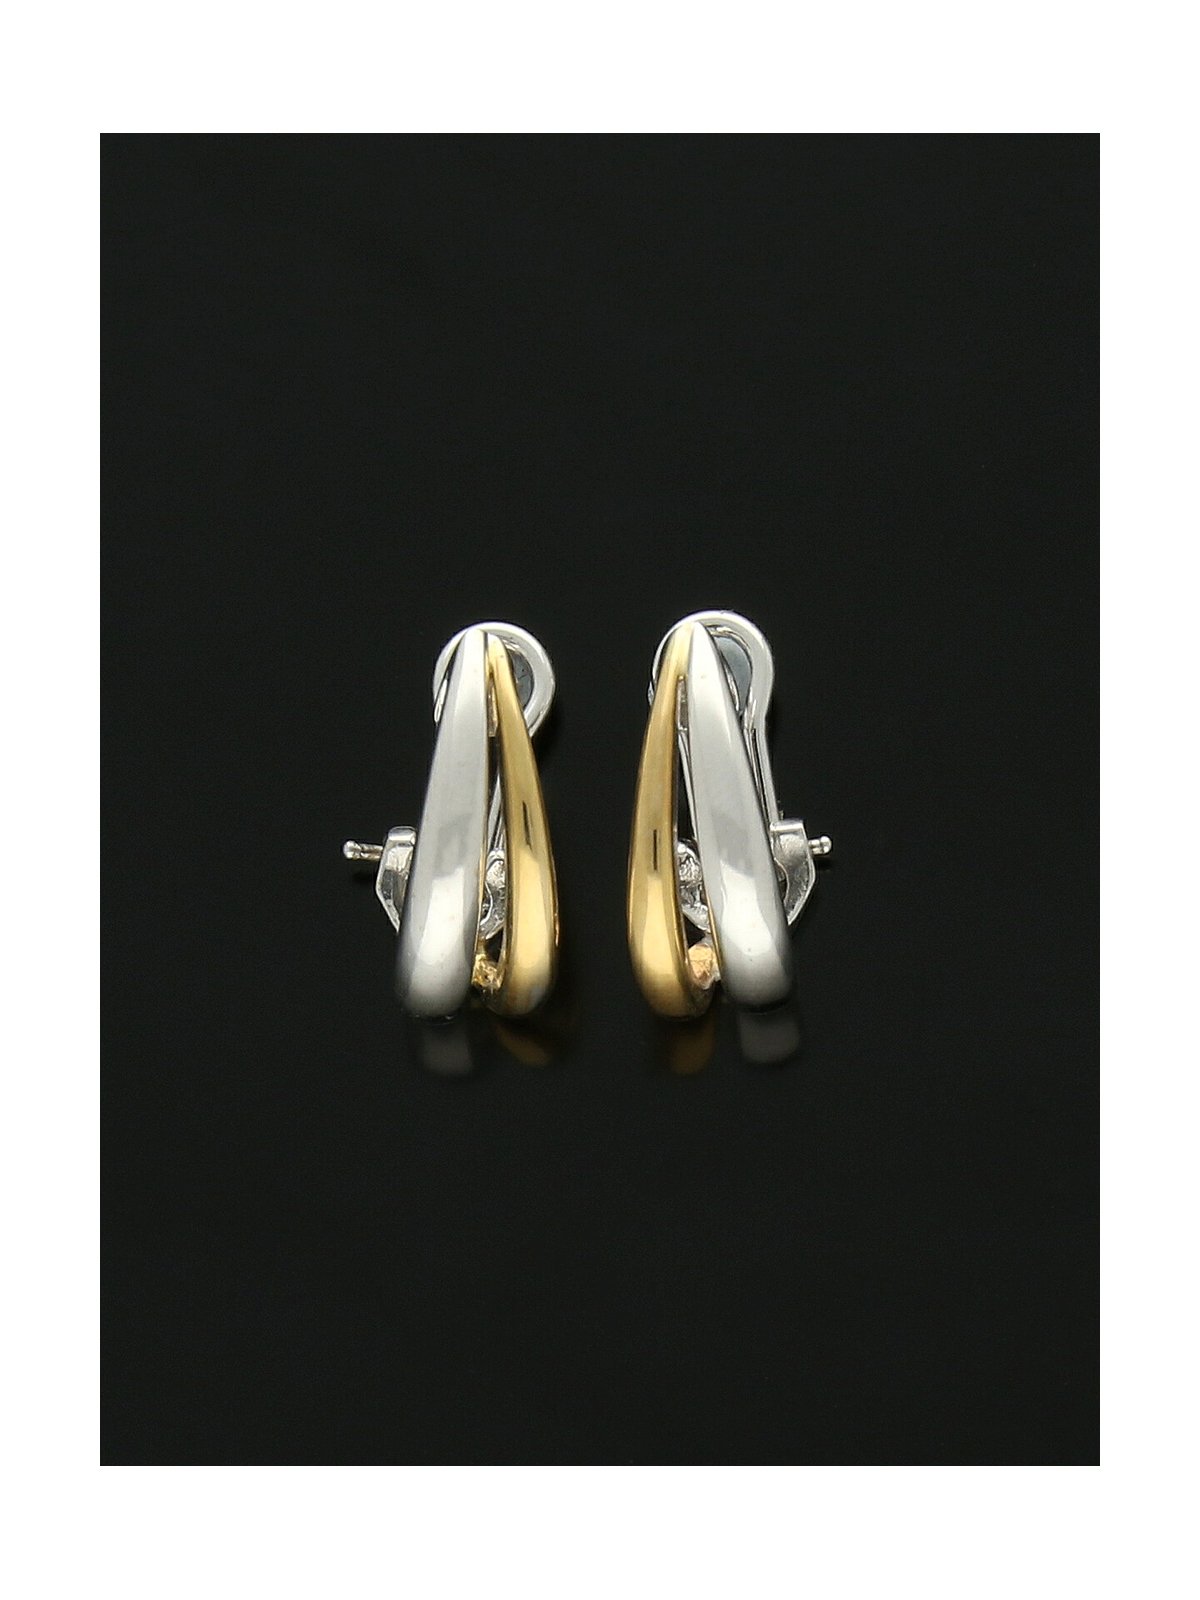 Crossover Hoop Earrings 11x15mm in 9ct Yellow & White Gold